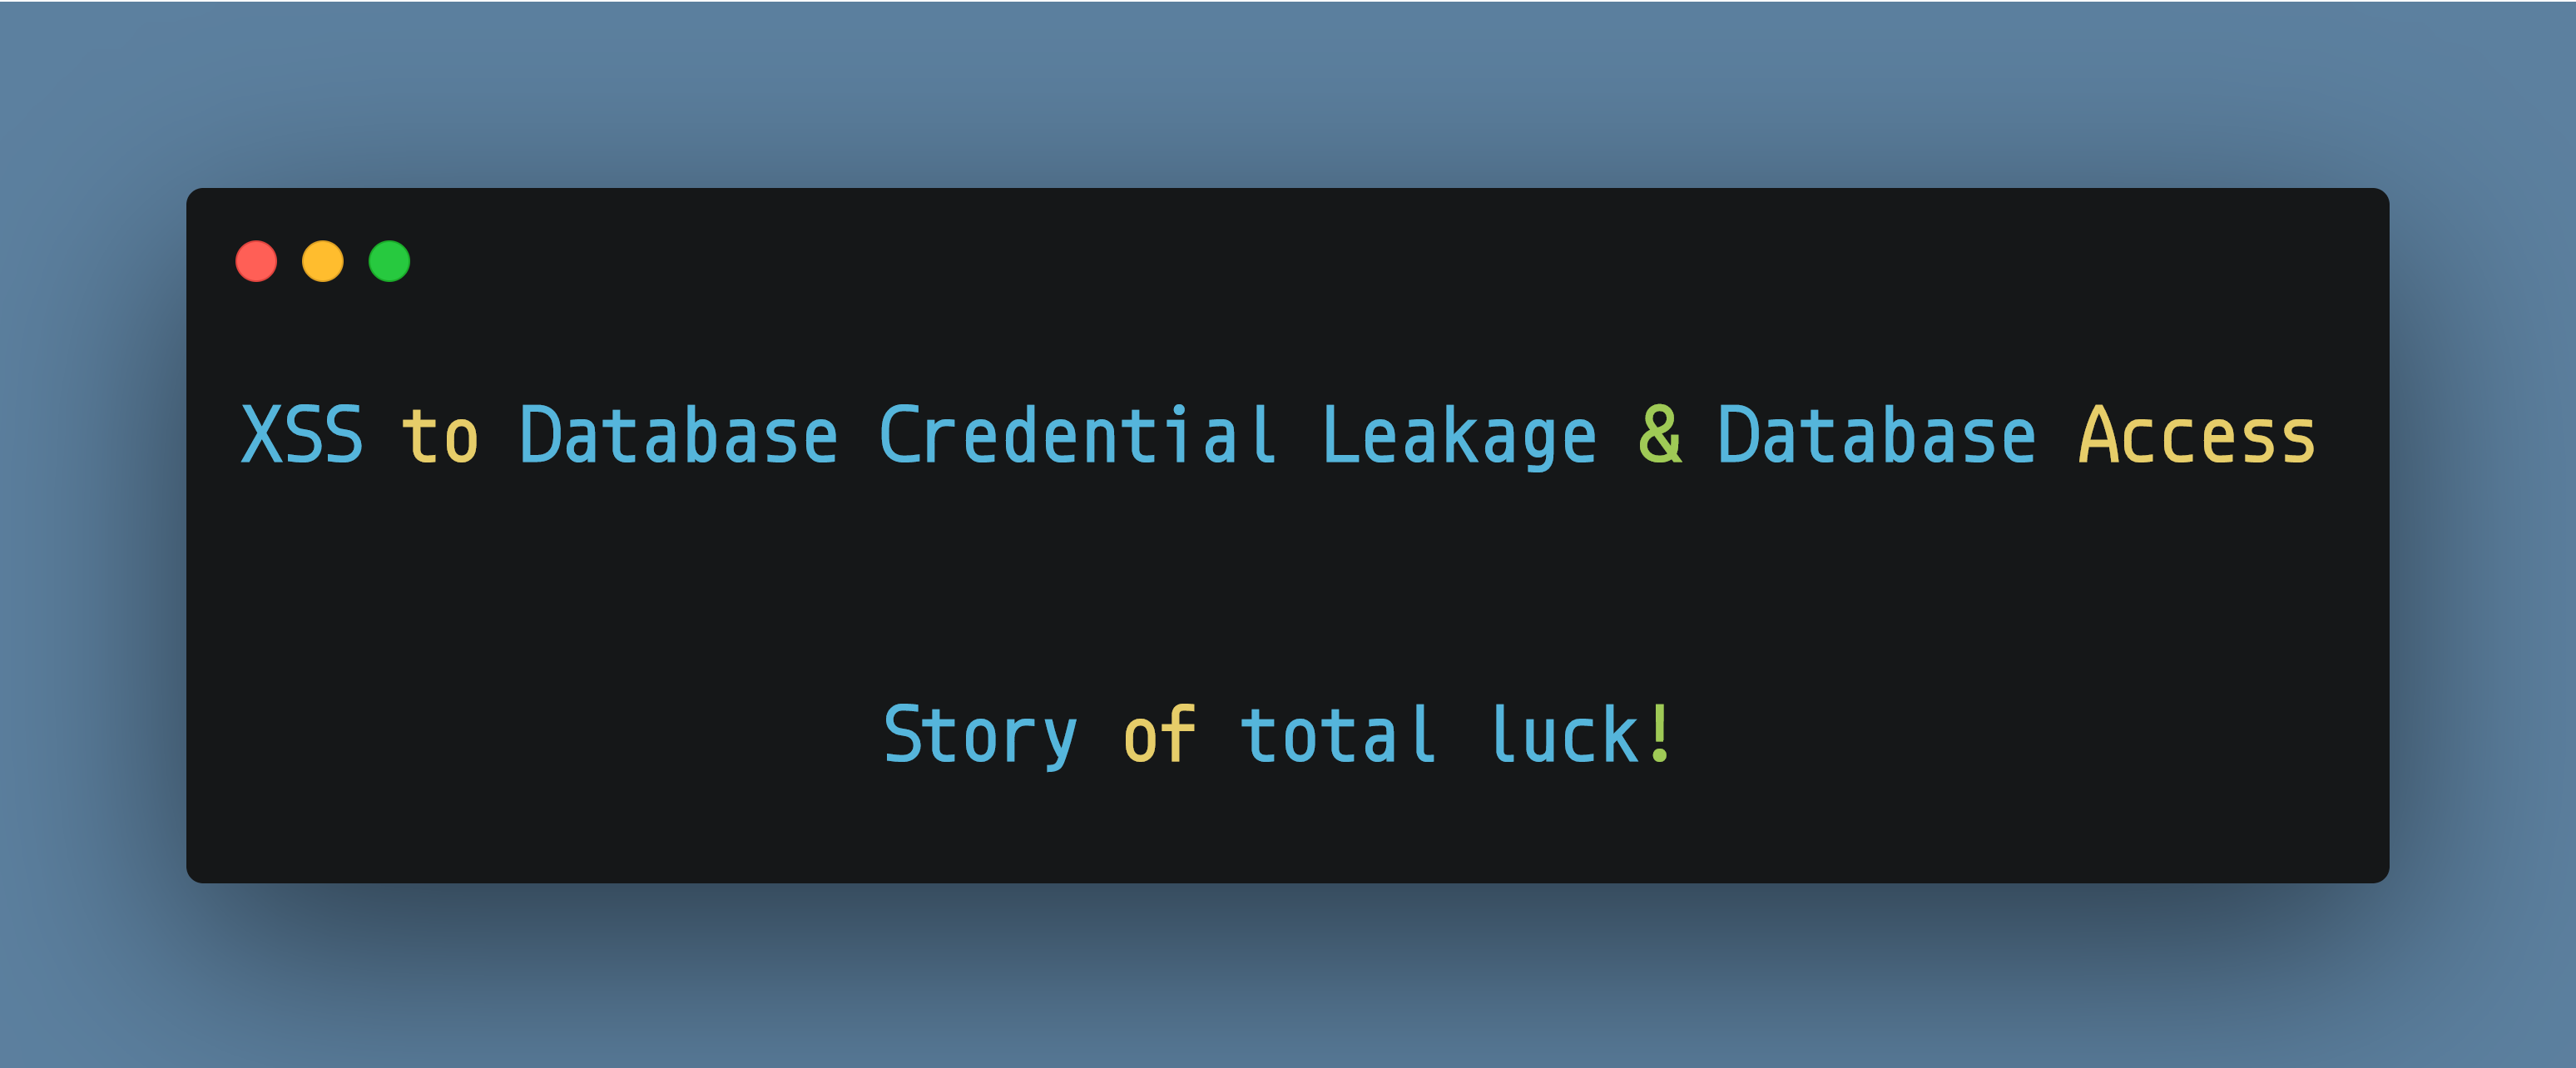 XSS to Database Credential Leakage & Database Access — Story of total luck!